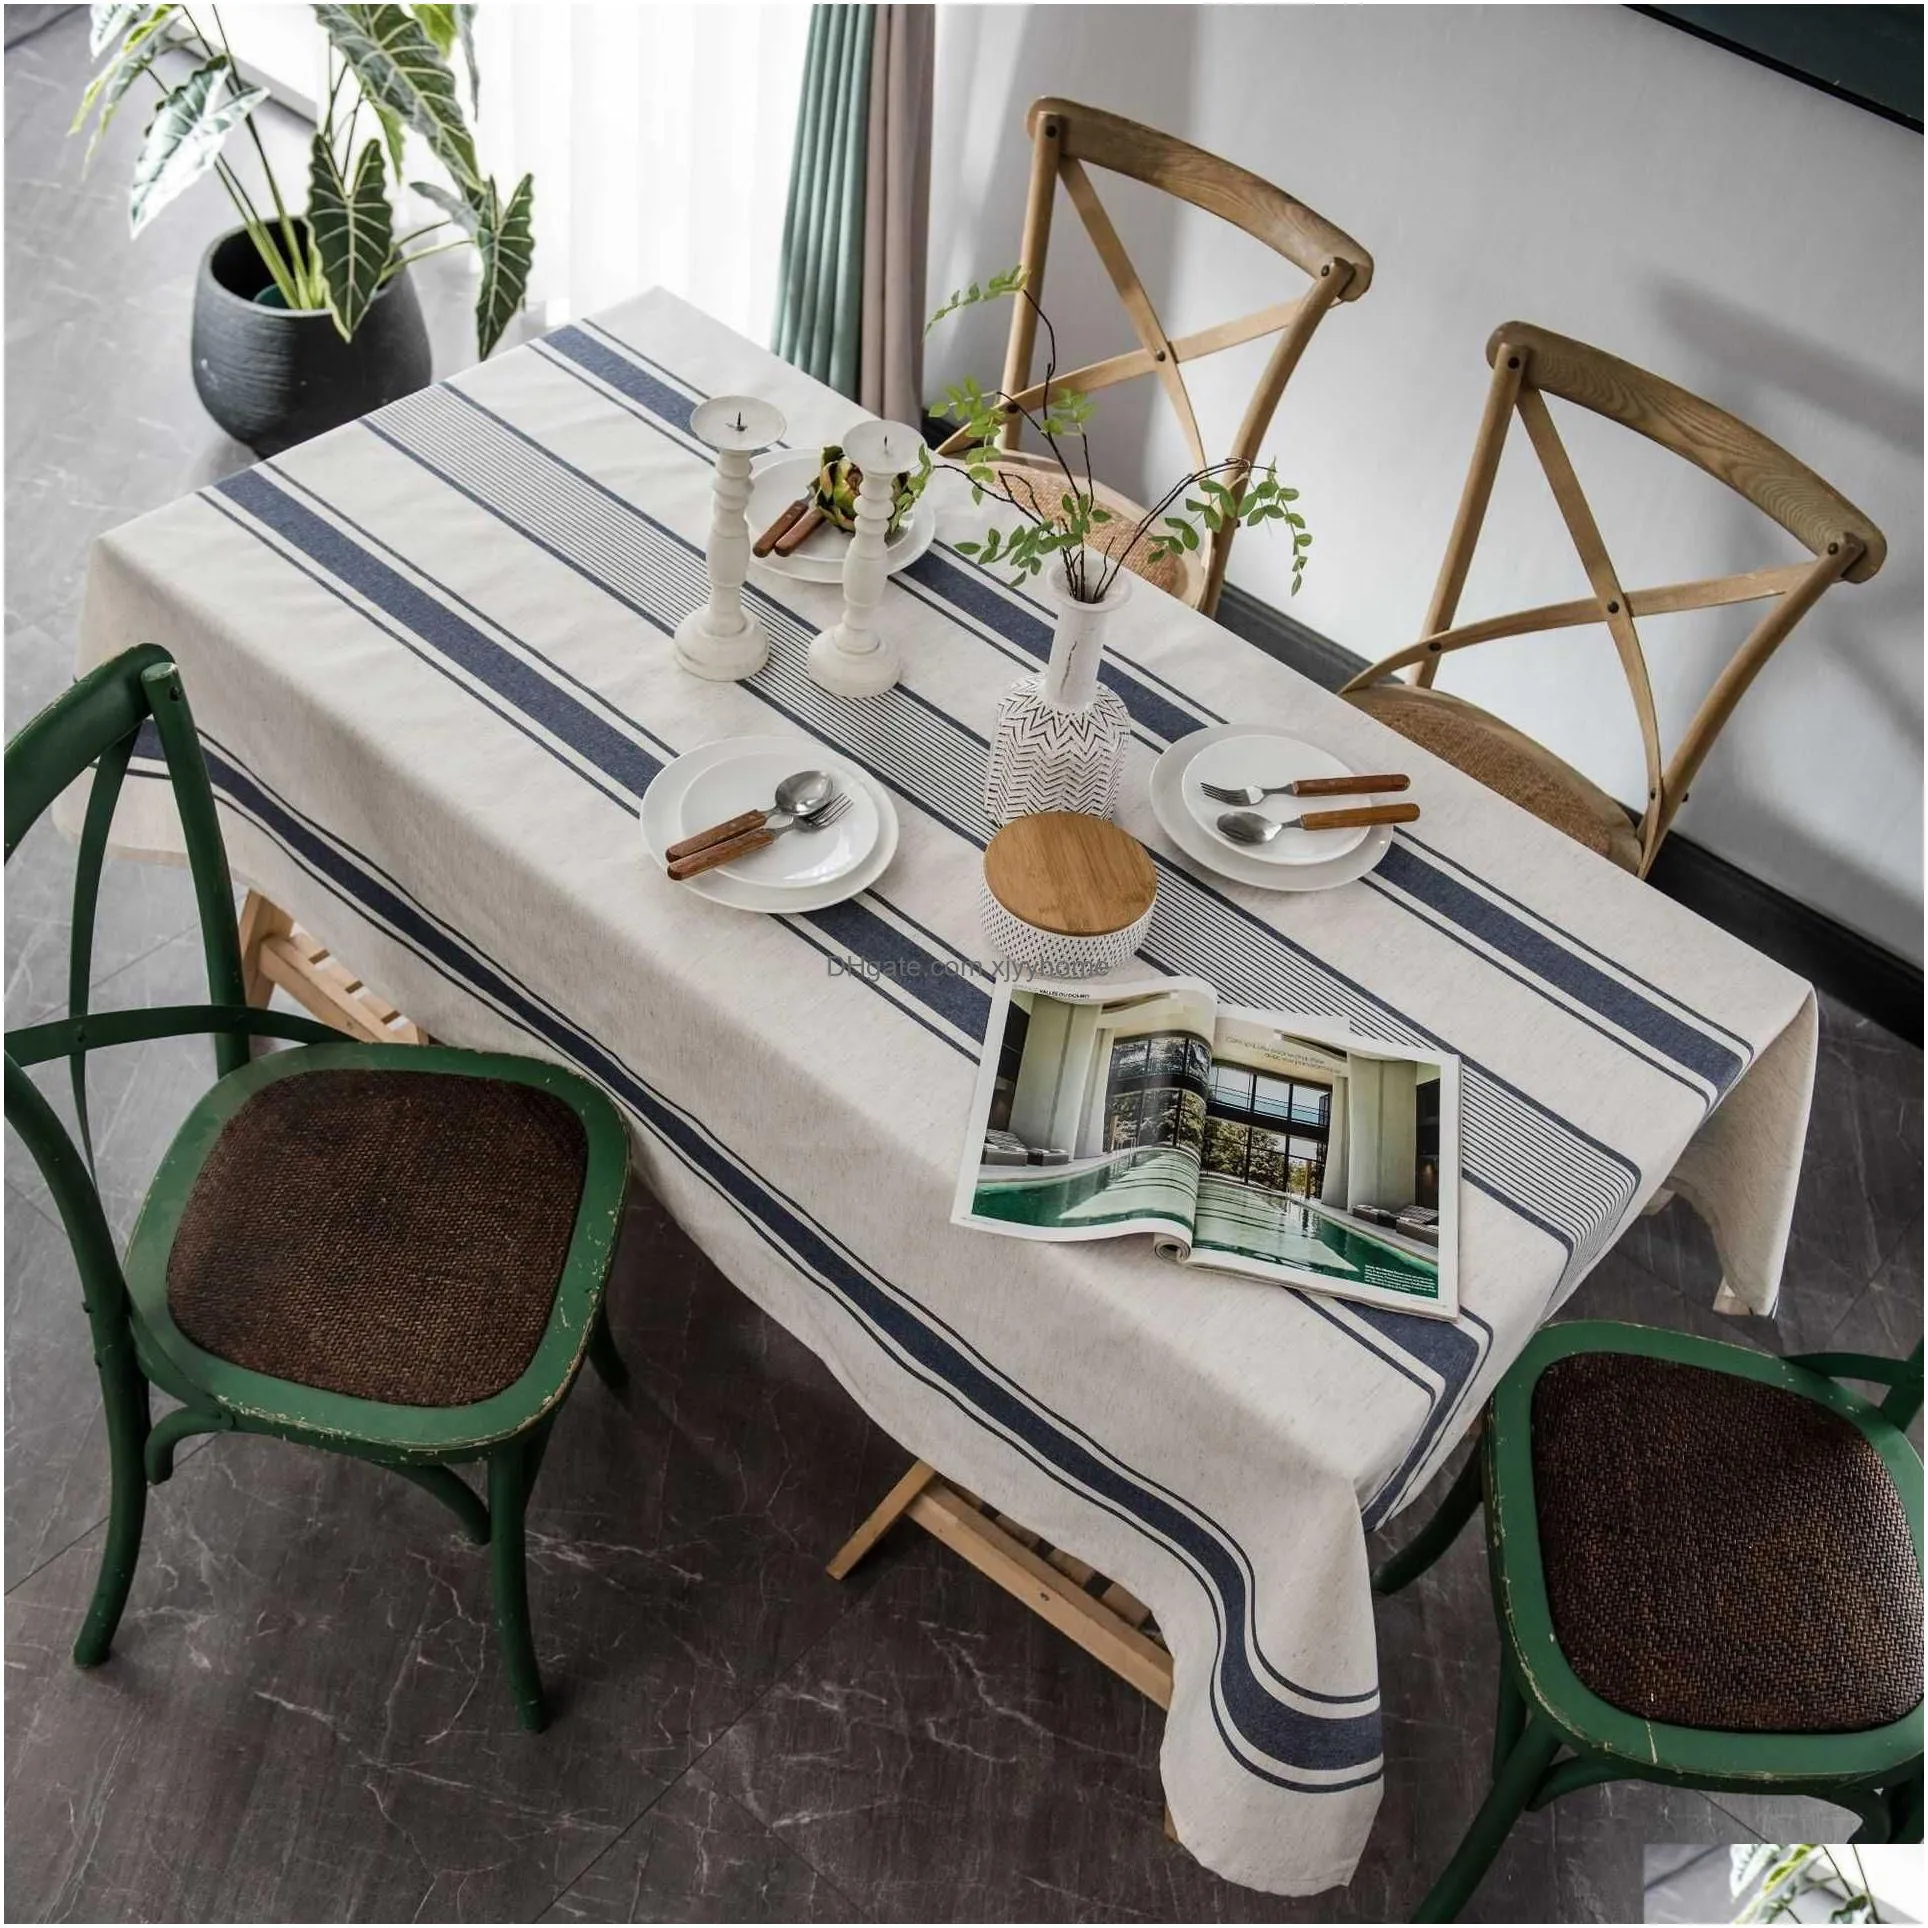 Table Cloth Table Cloth Vintage Linen Cotton Striped Tablecloth For Home Decoration Dustproof Dining Party Banquet Runner Mantel Home Dhbpz